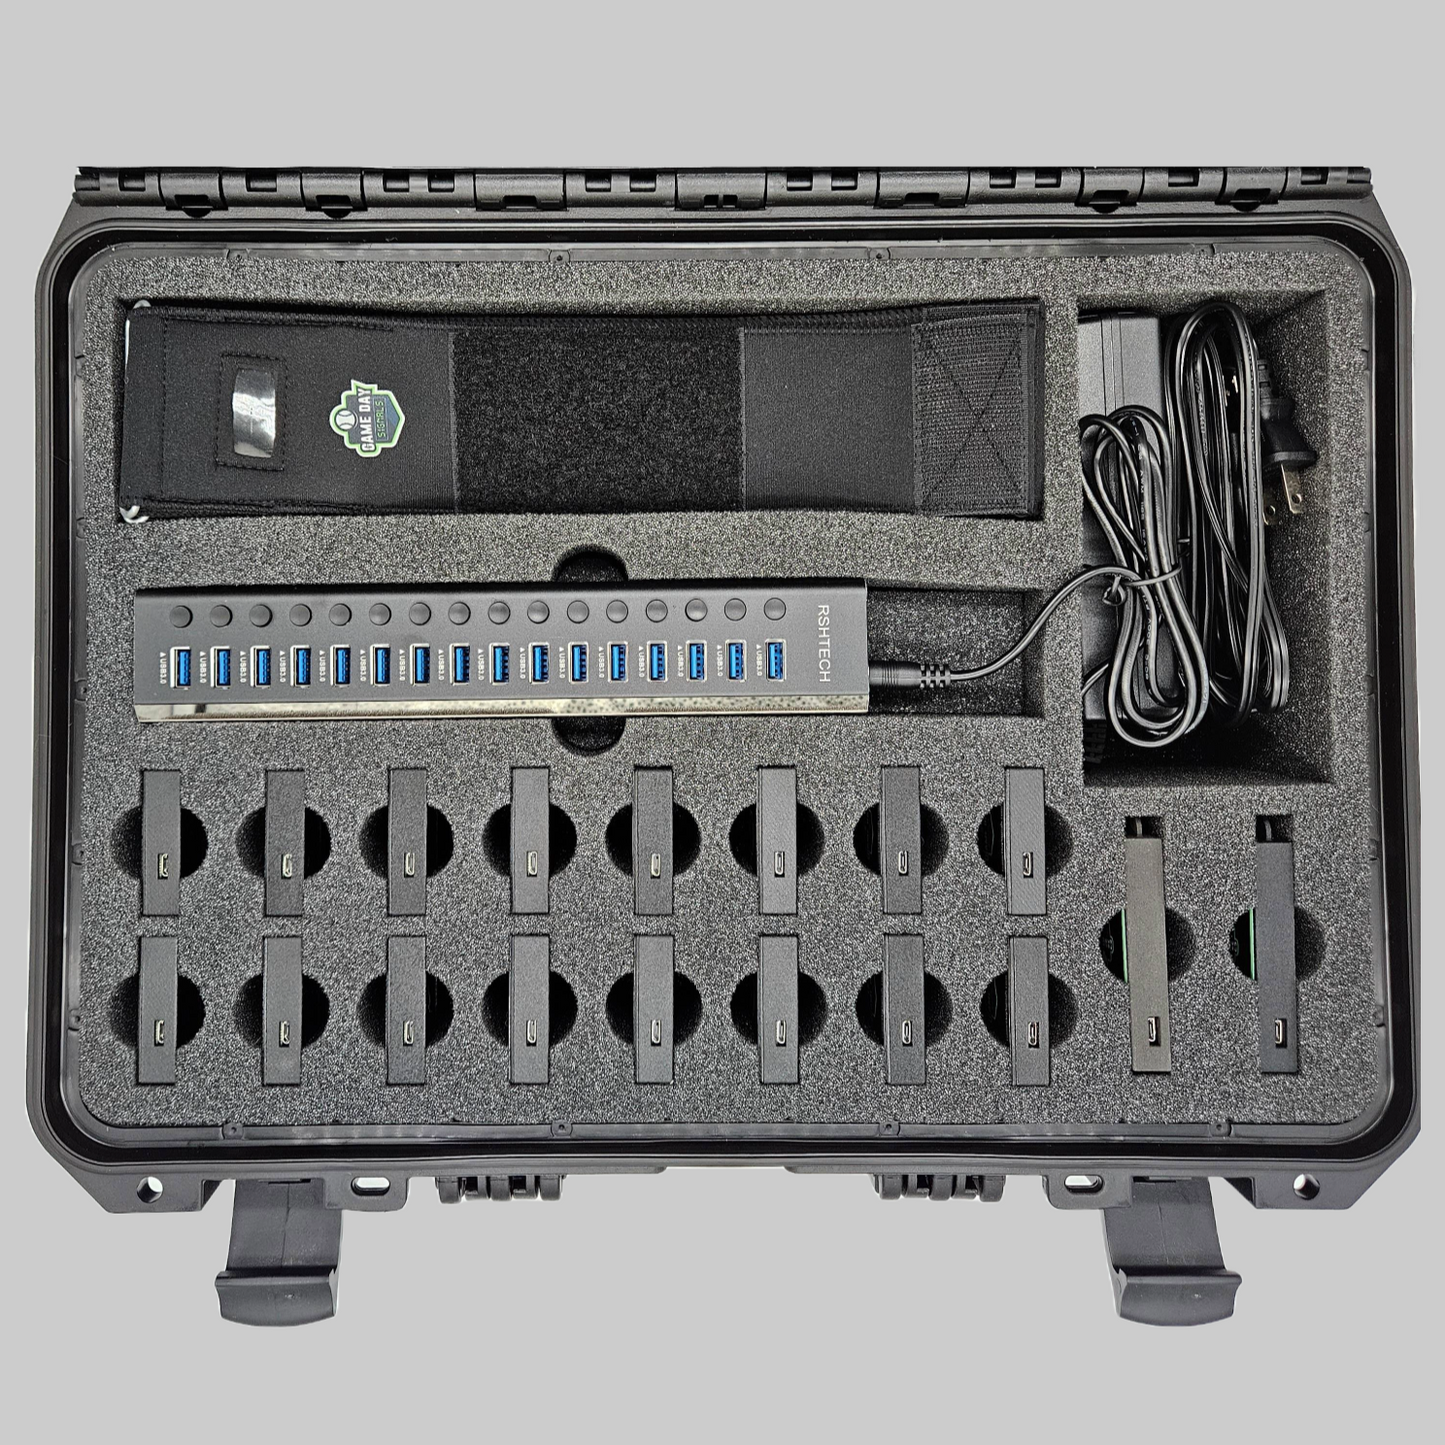 Carrying Case and Charging Hub